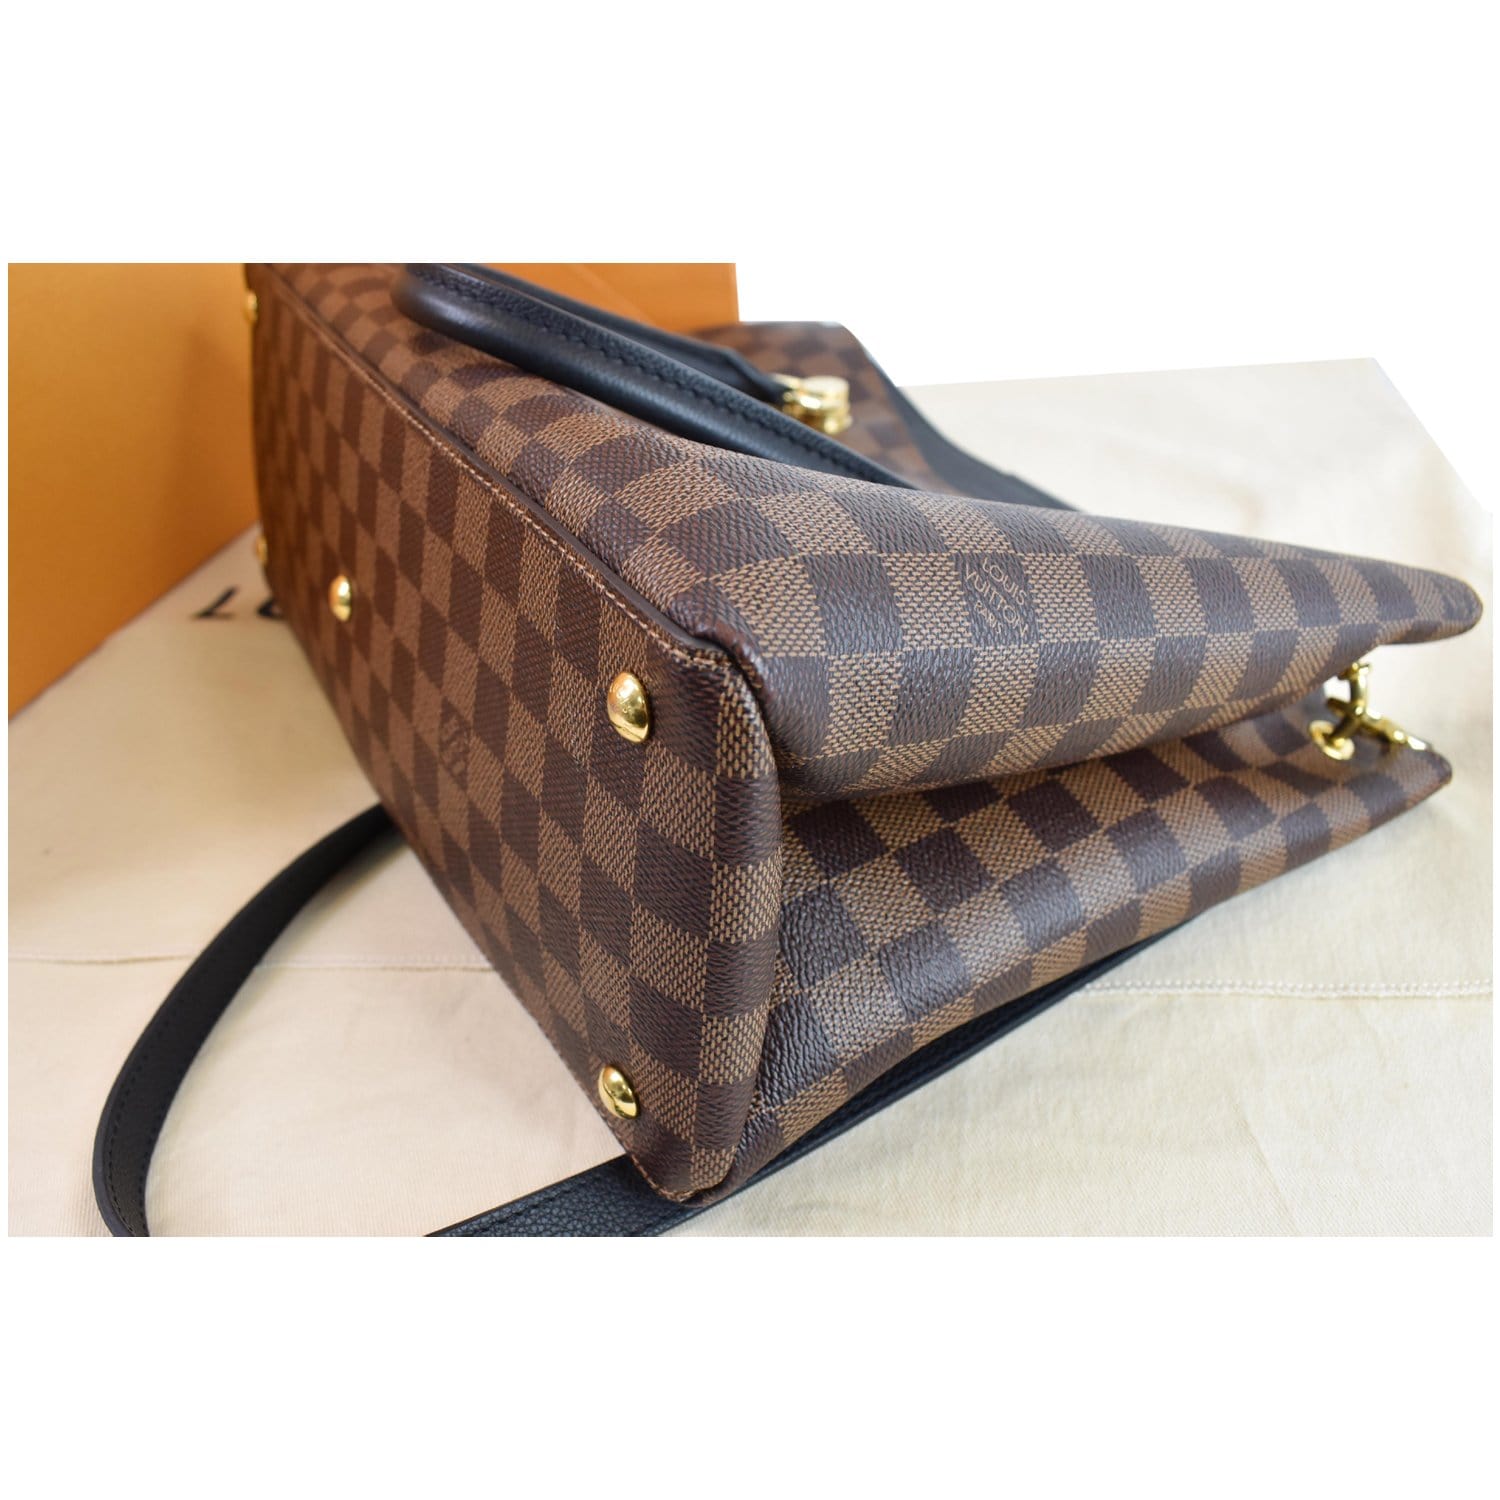 Lv riverside leather handbag Louis Vuitton Brown in Leather - 32454387